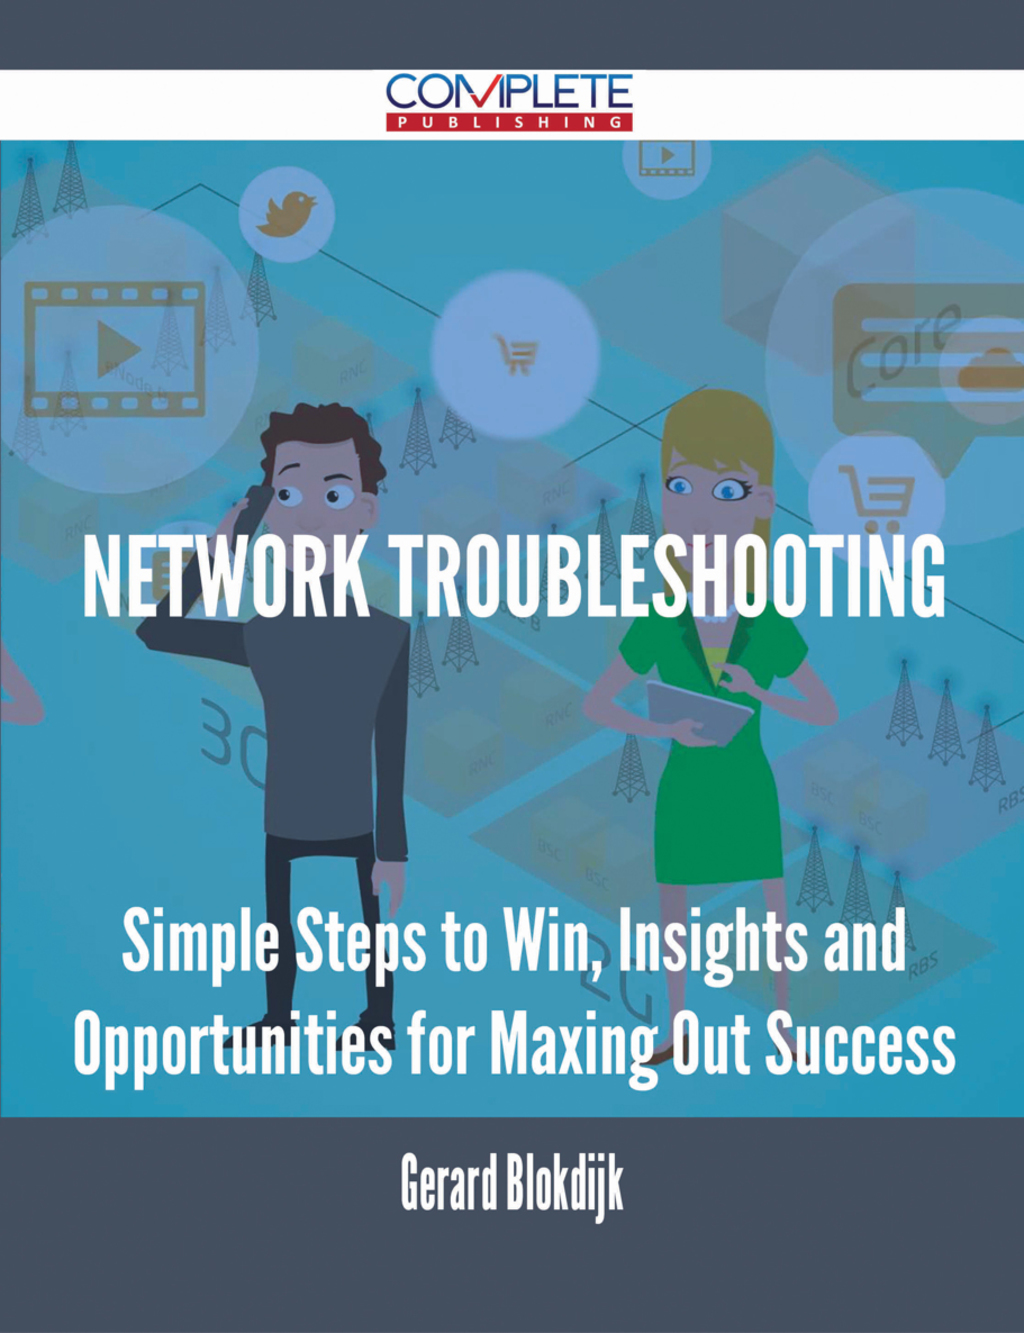 ISBN 9781488896323 product image for Network Troubleshooting - Simple Steps to Win  Insights and Opportunities for Ma | upcitemdb.com